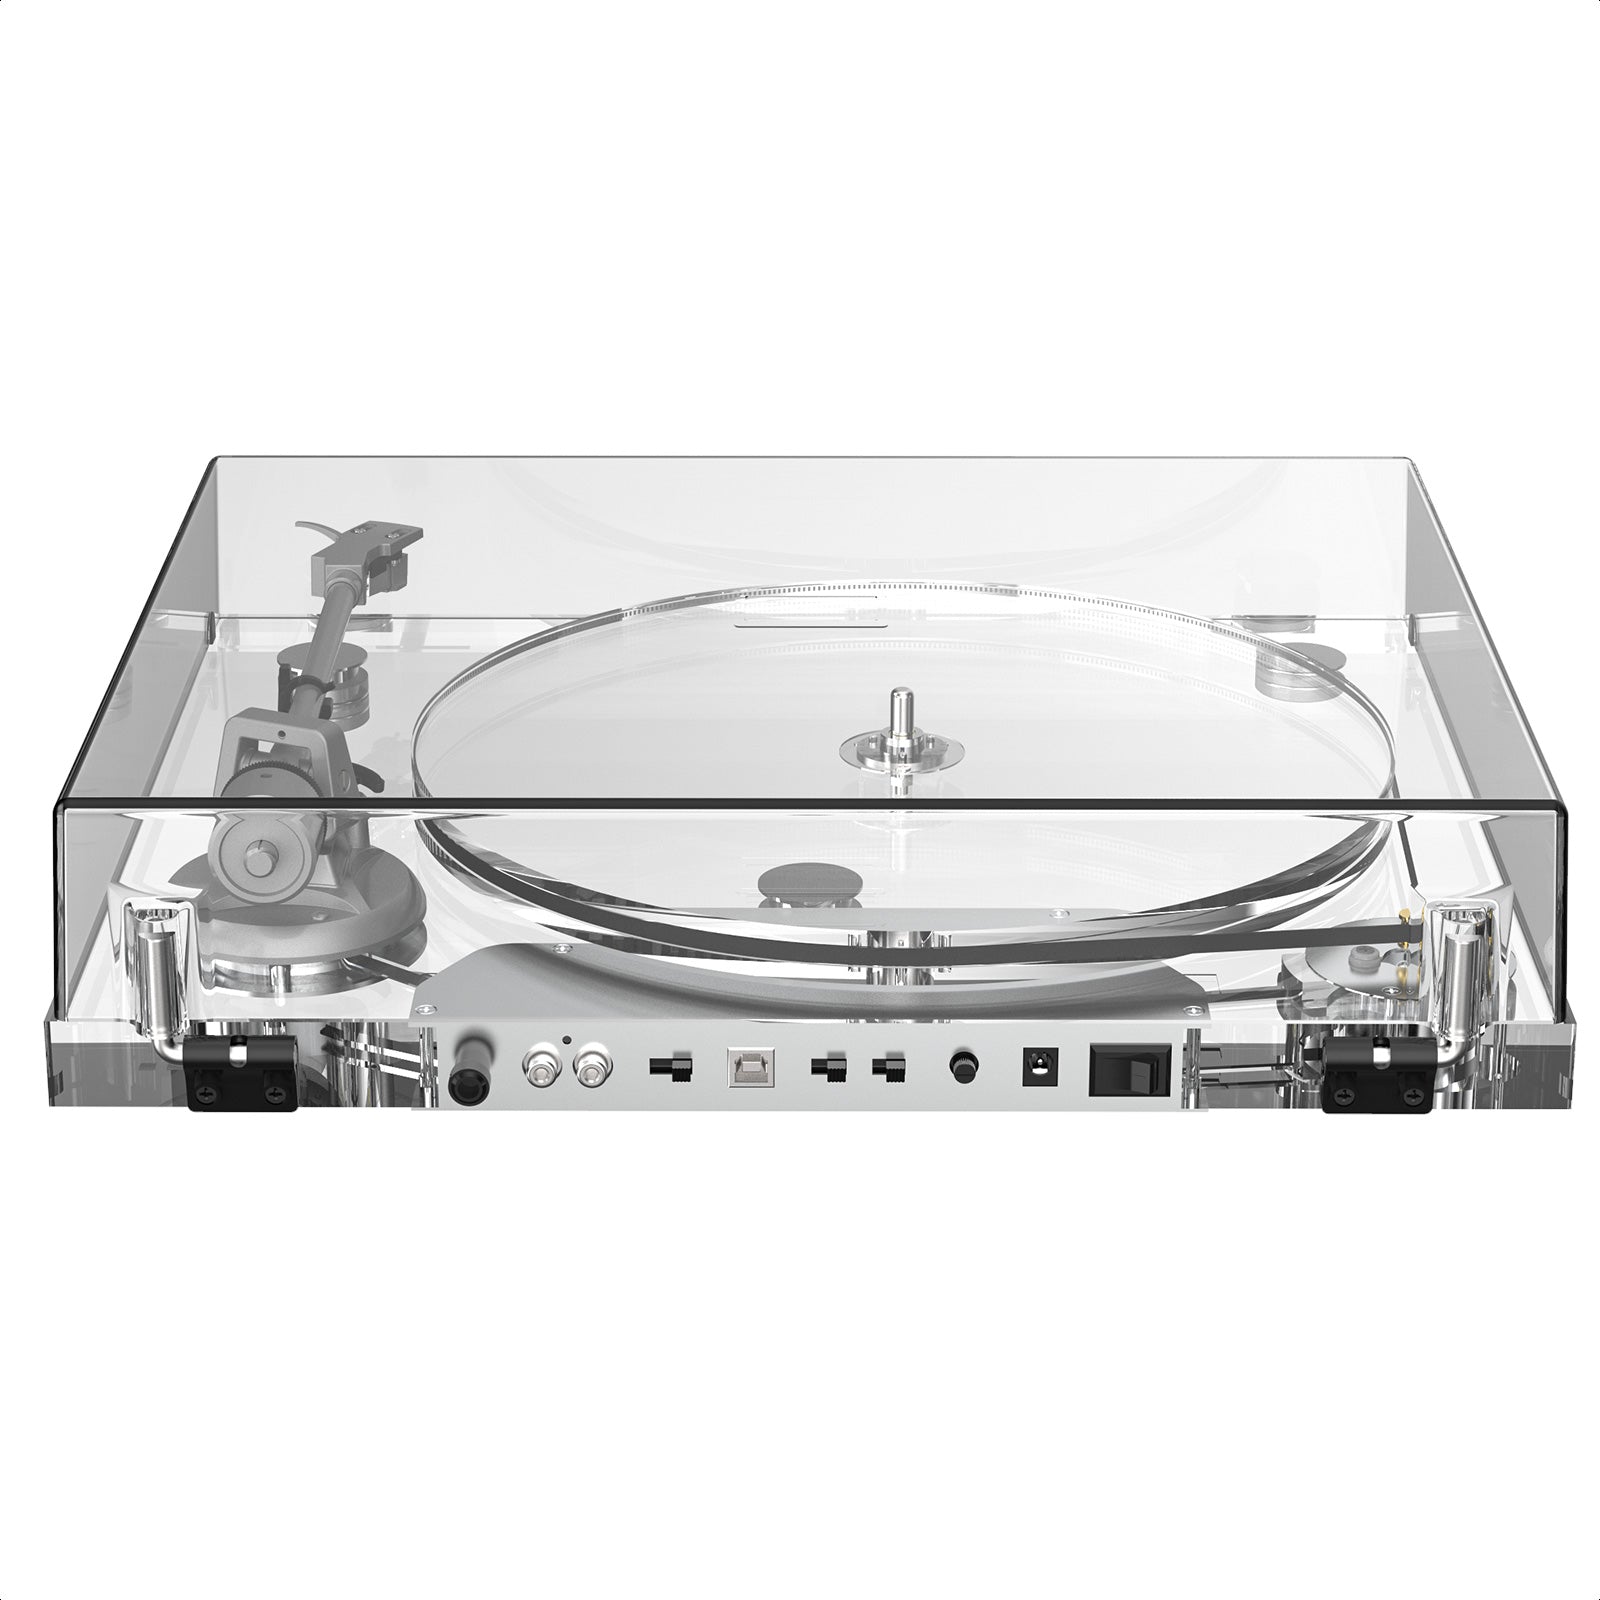 Belt Driven High Fidelity Fully Transparent Acrylic Turntable ICE1